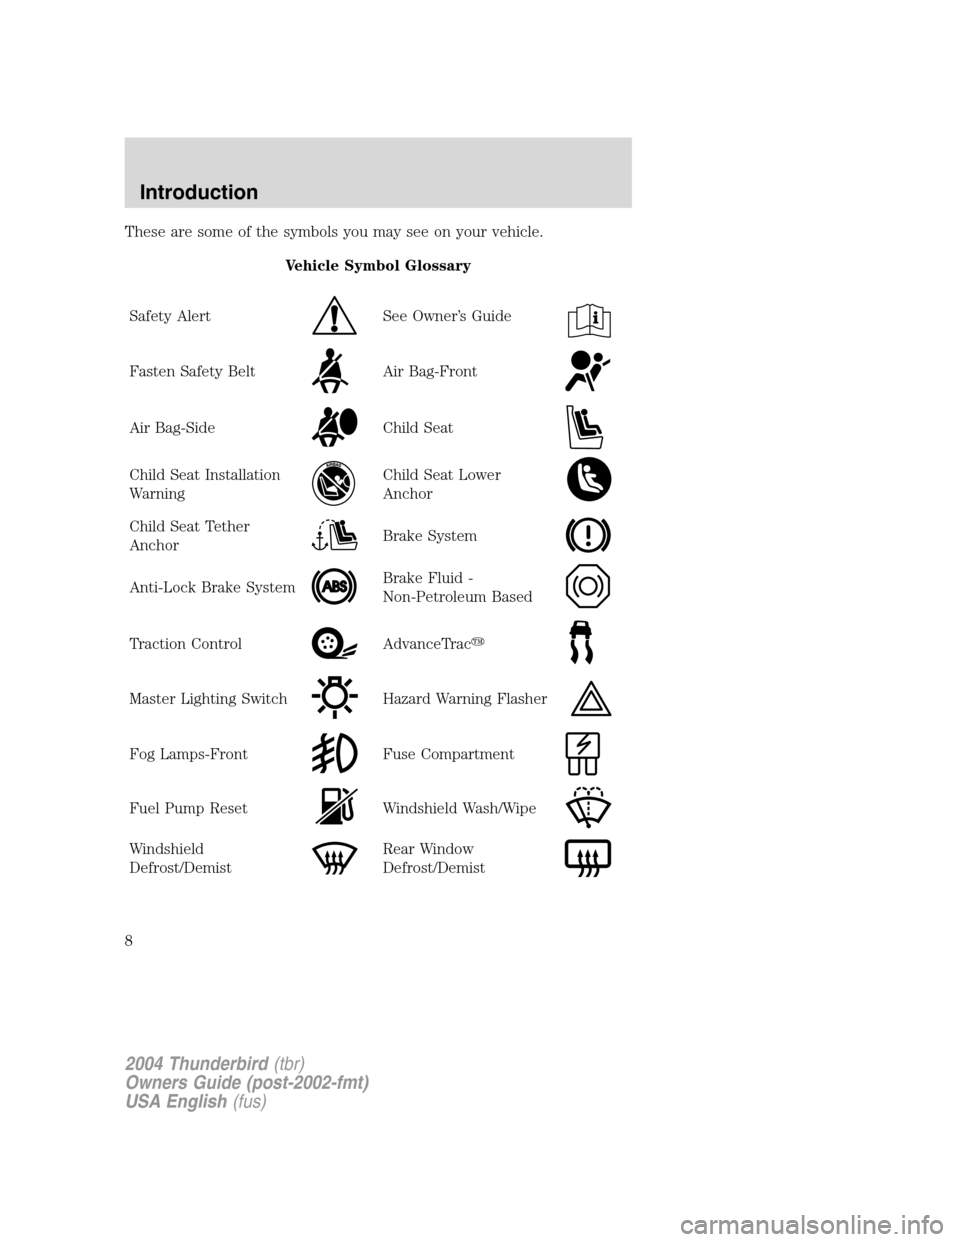 FORD THUNDERBIRD 2004 11.G Owners Manual These are some of the symbols you may see on your vehicle.Vehicle Symbol Glossary
Safety Alert
See Owner ’s Guide
Fasten Safety BeltAir Bag-Front
Air Bag-SideChild Seat
Child Seat Installation
Warni